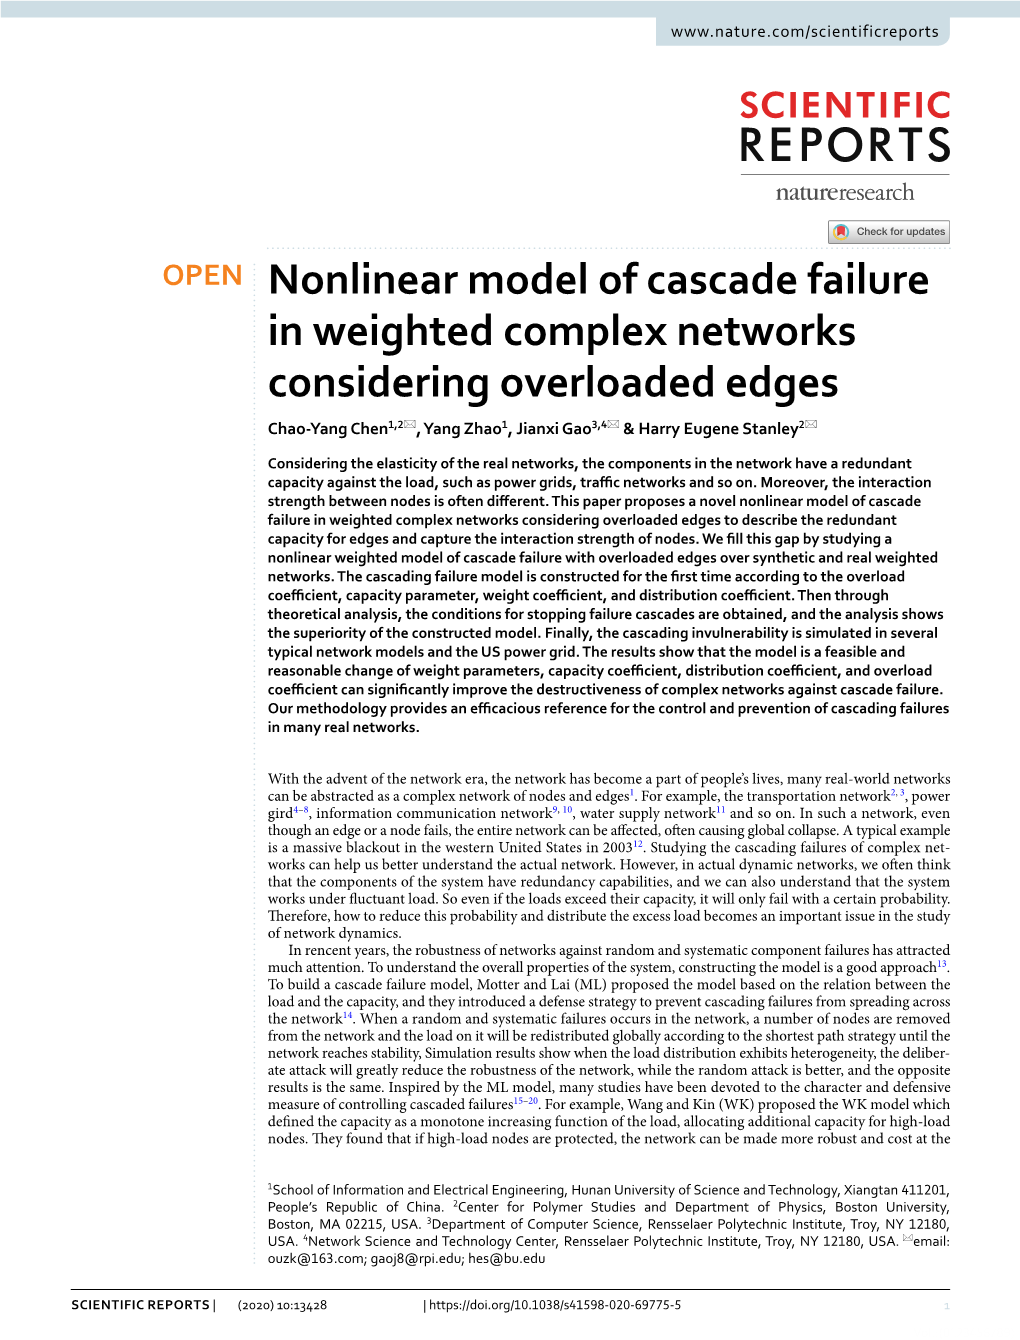 Nonlinear Model of Cascade Failure in Weighted Complex Networks Considering Overloaded Edges Chao‑Yang Chen1,2*, Yang Zhao1, Jianxi Gao3,4* & Harry Eugene Stanley2*